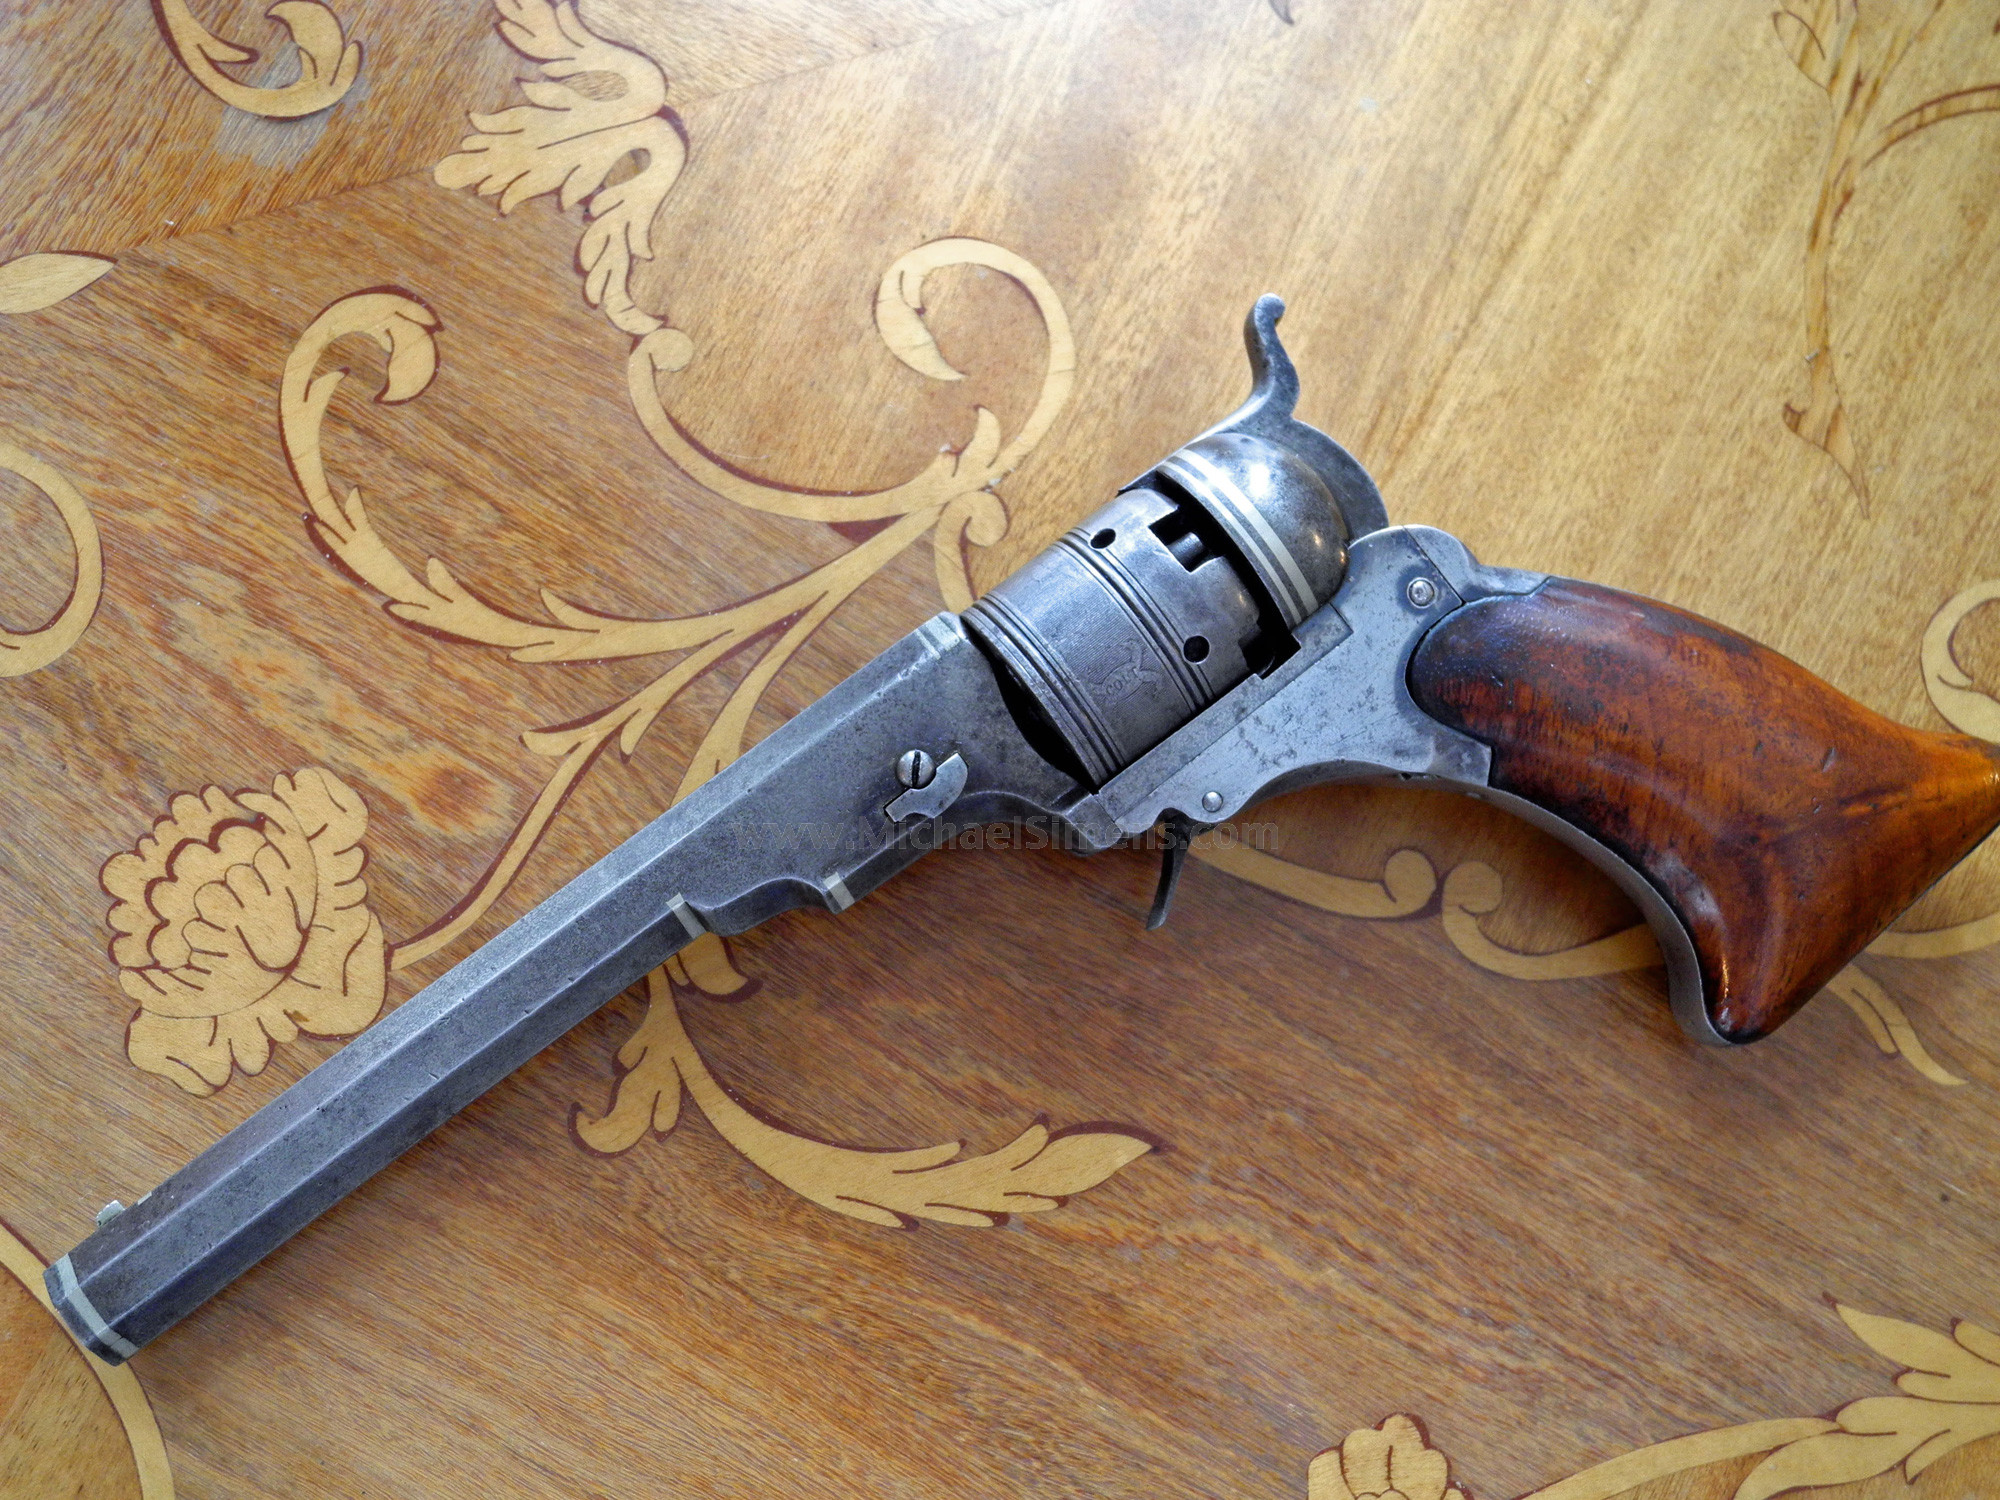 COLT #3 BELT MODEL PATERSON REVOLVER WITH SILVER BANDS